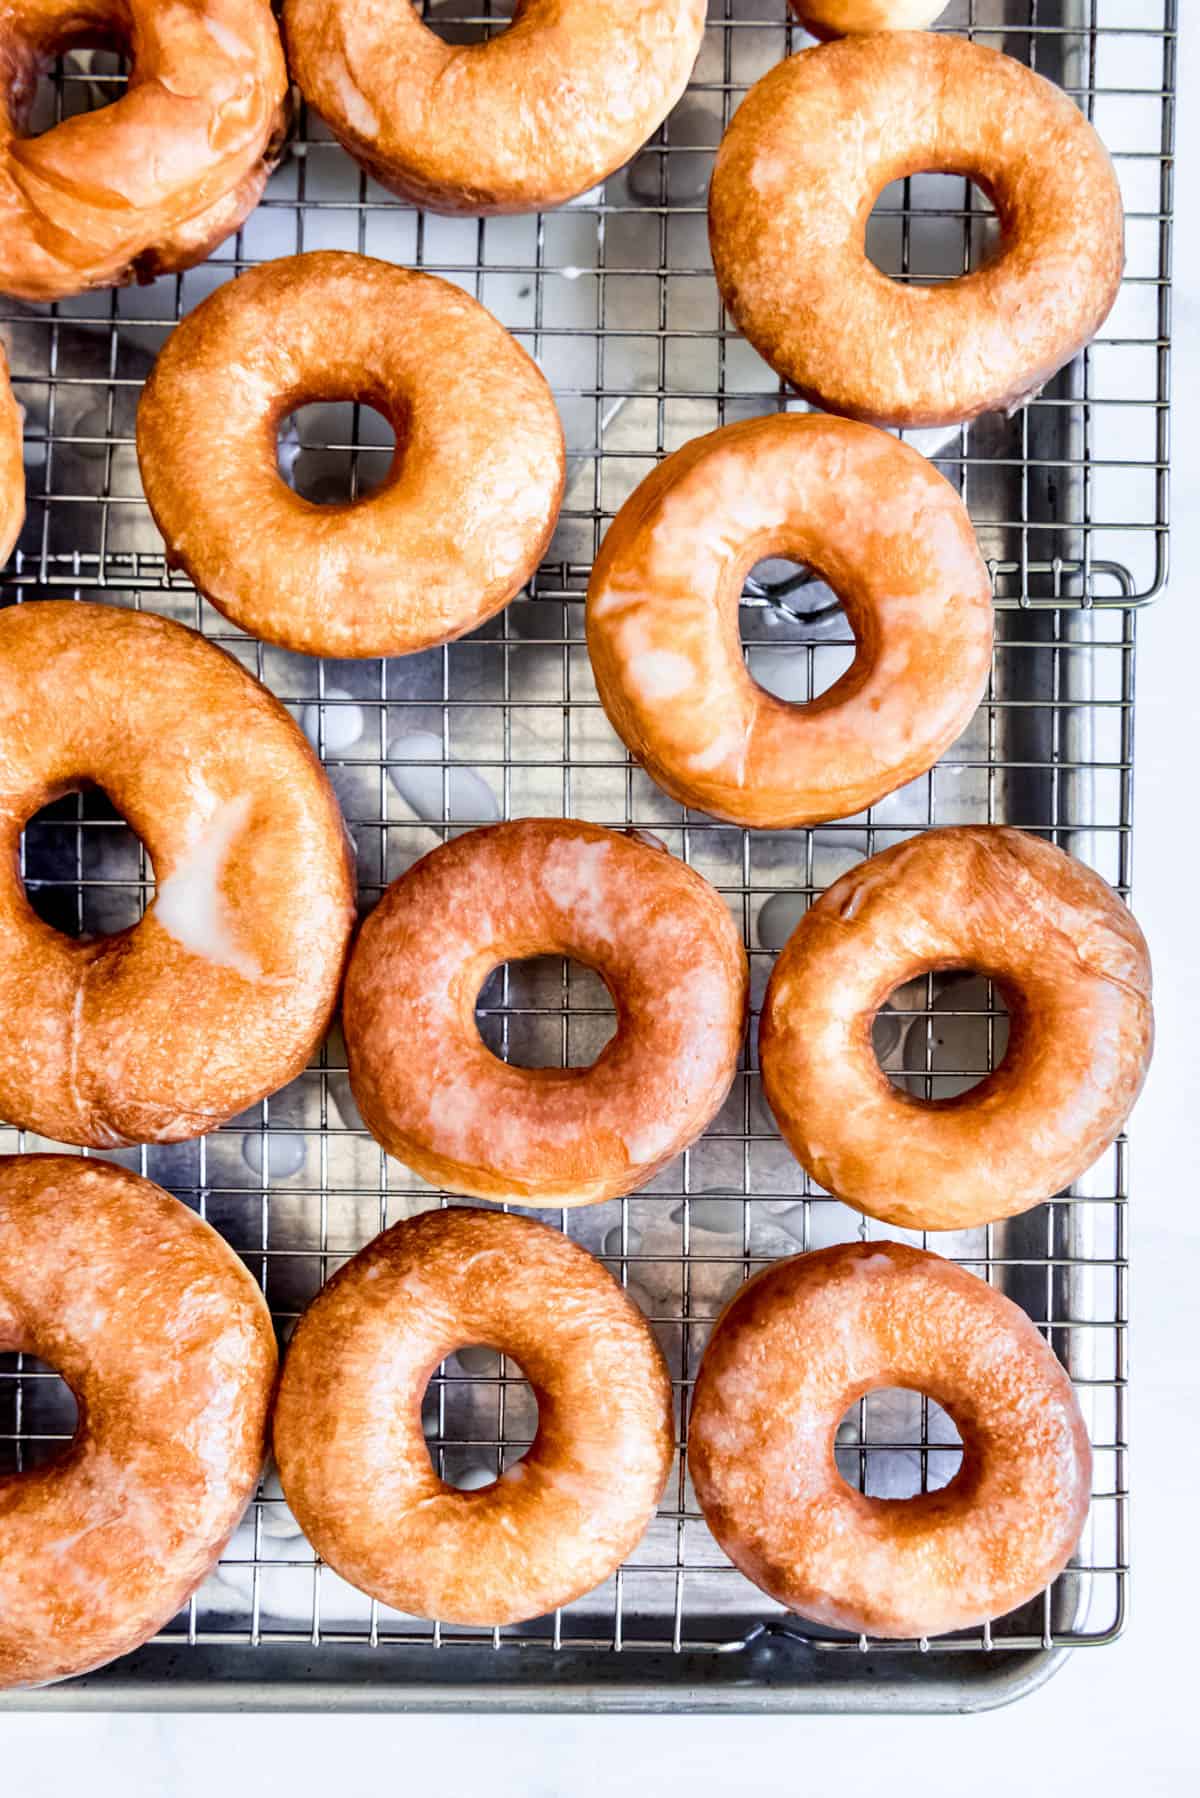 An overhead image of freshly made homemade glazed donuts.